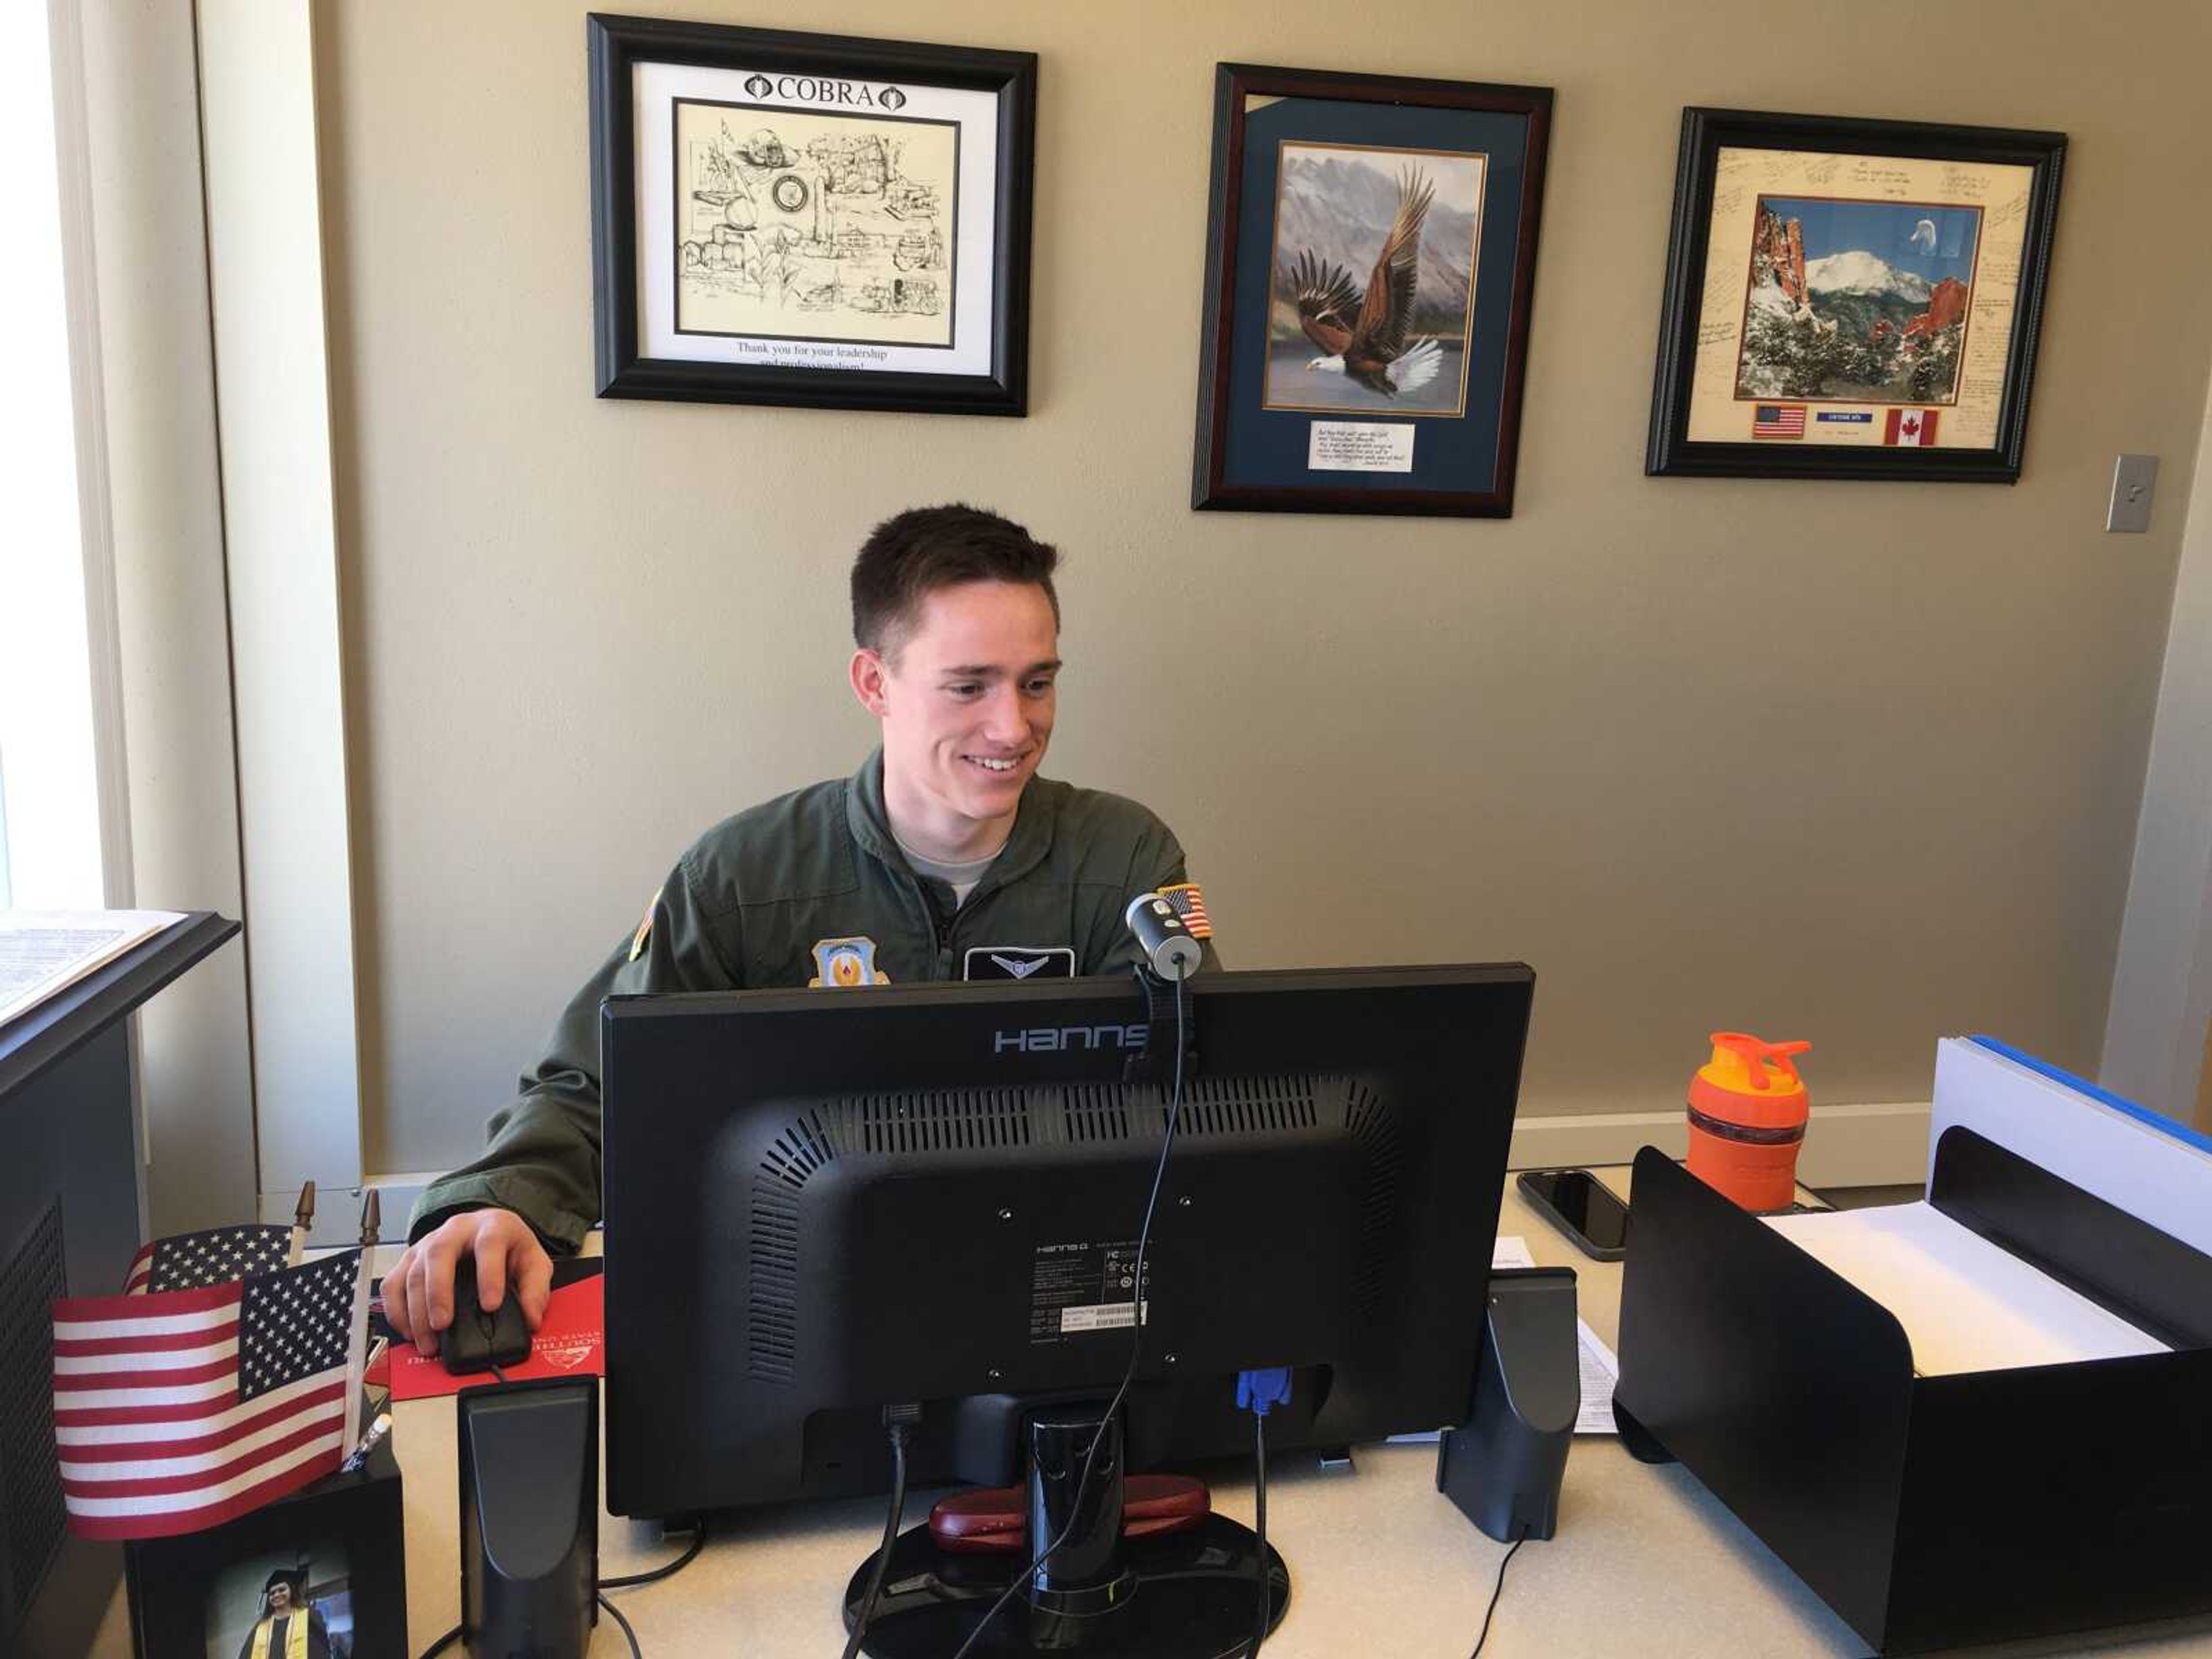 As the cadet wing commander of the AFROTC, Cadet Destin Garst's primary responsibility is overseeing all of the training and extracurricular activities.